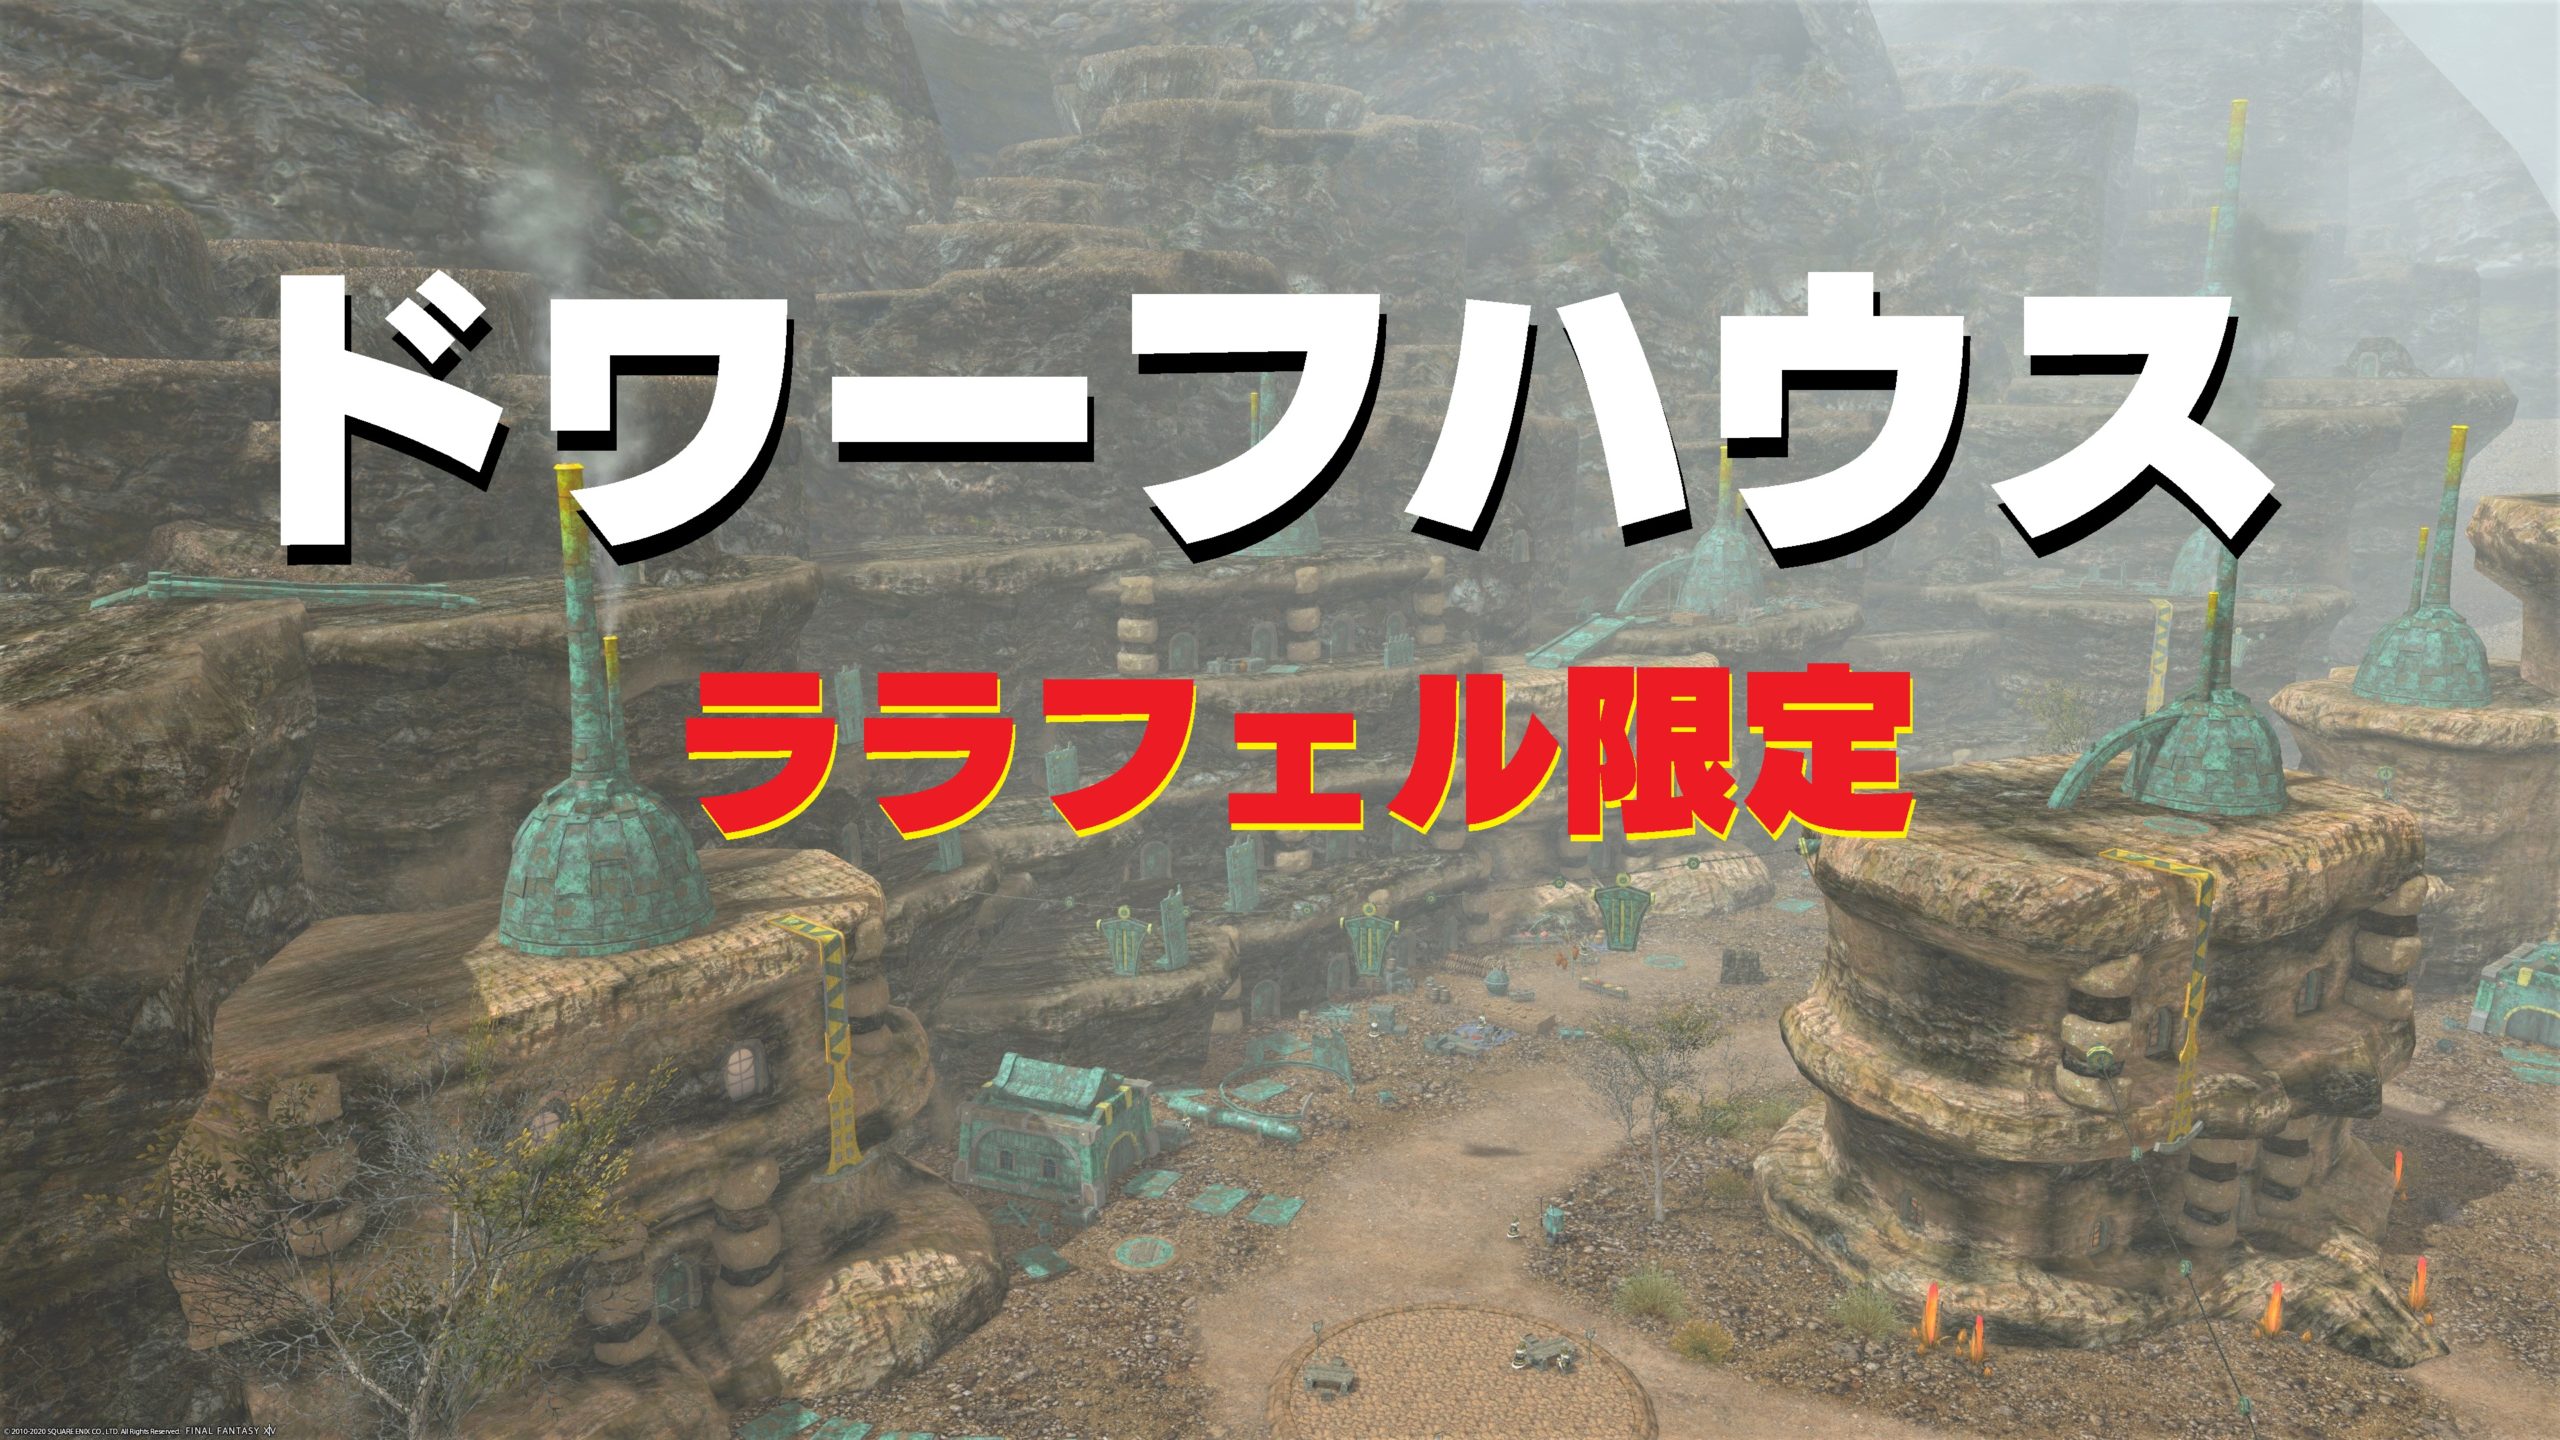 Ff14 ドワーフハウス 建物探訪 コルシア島 うさねこ散歩